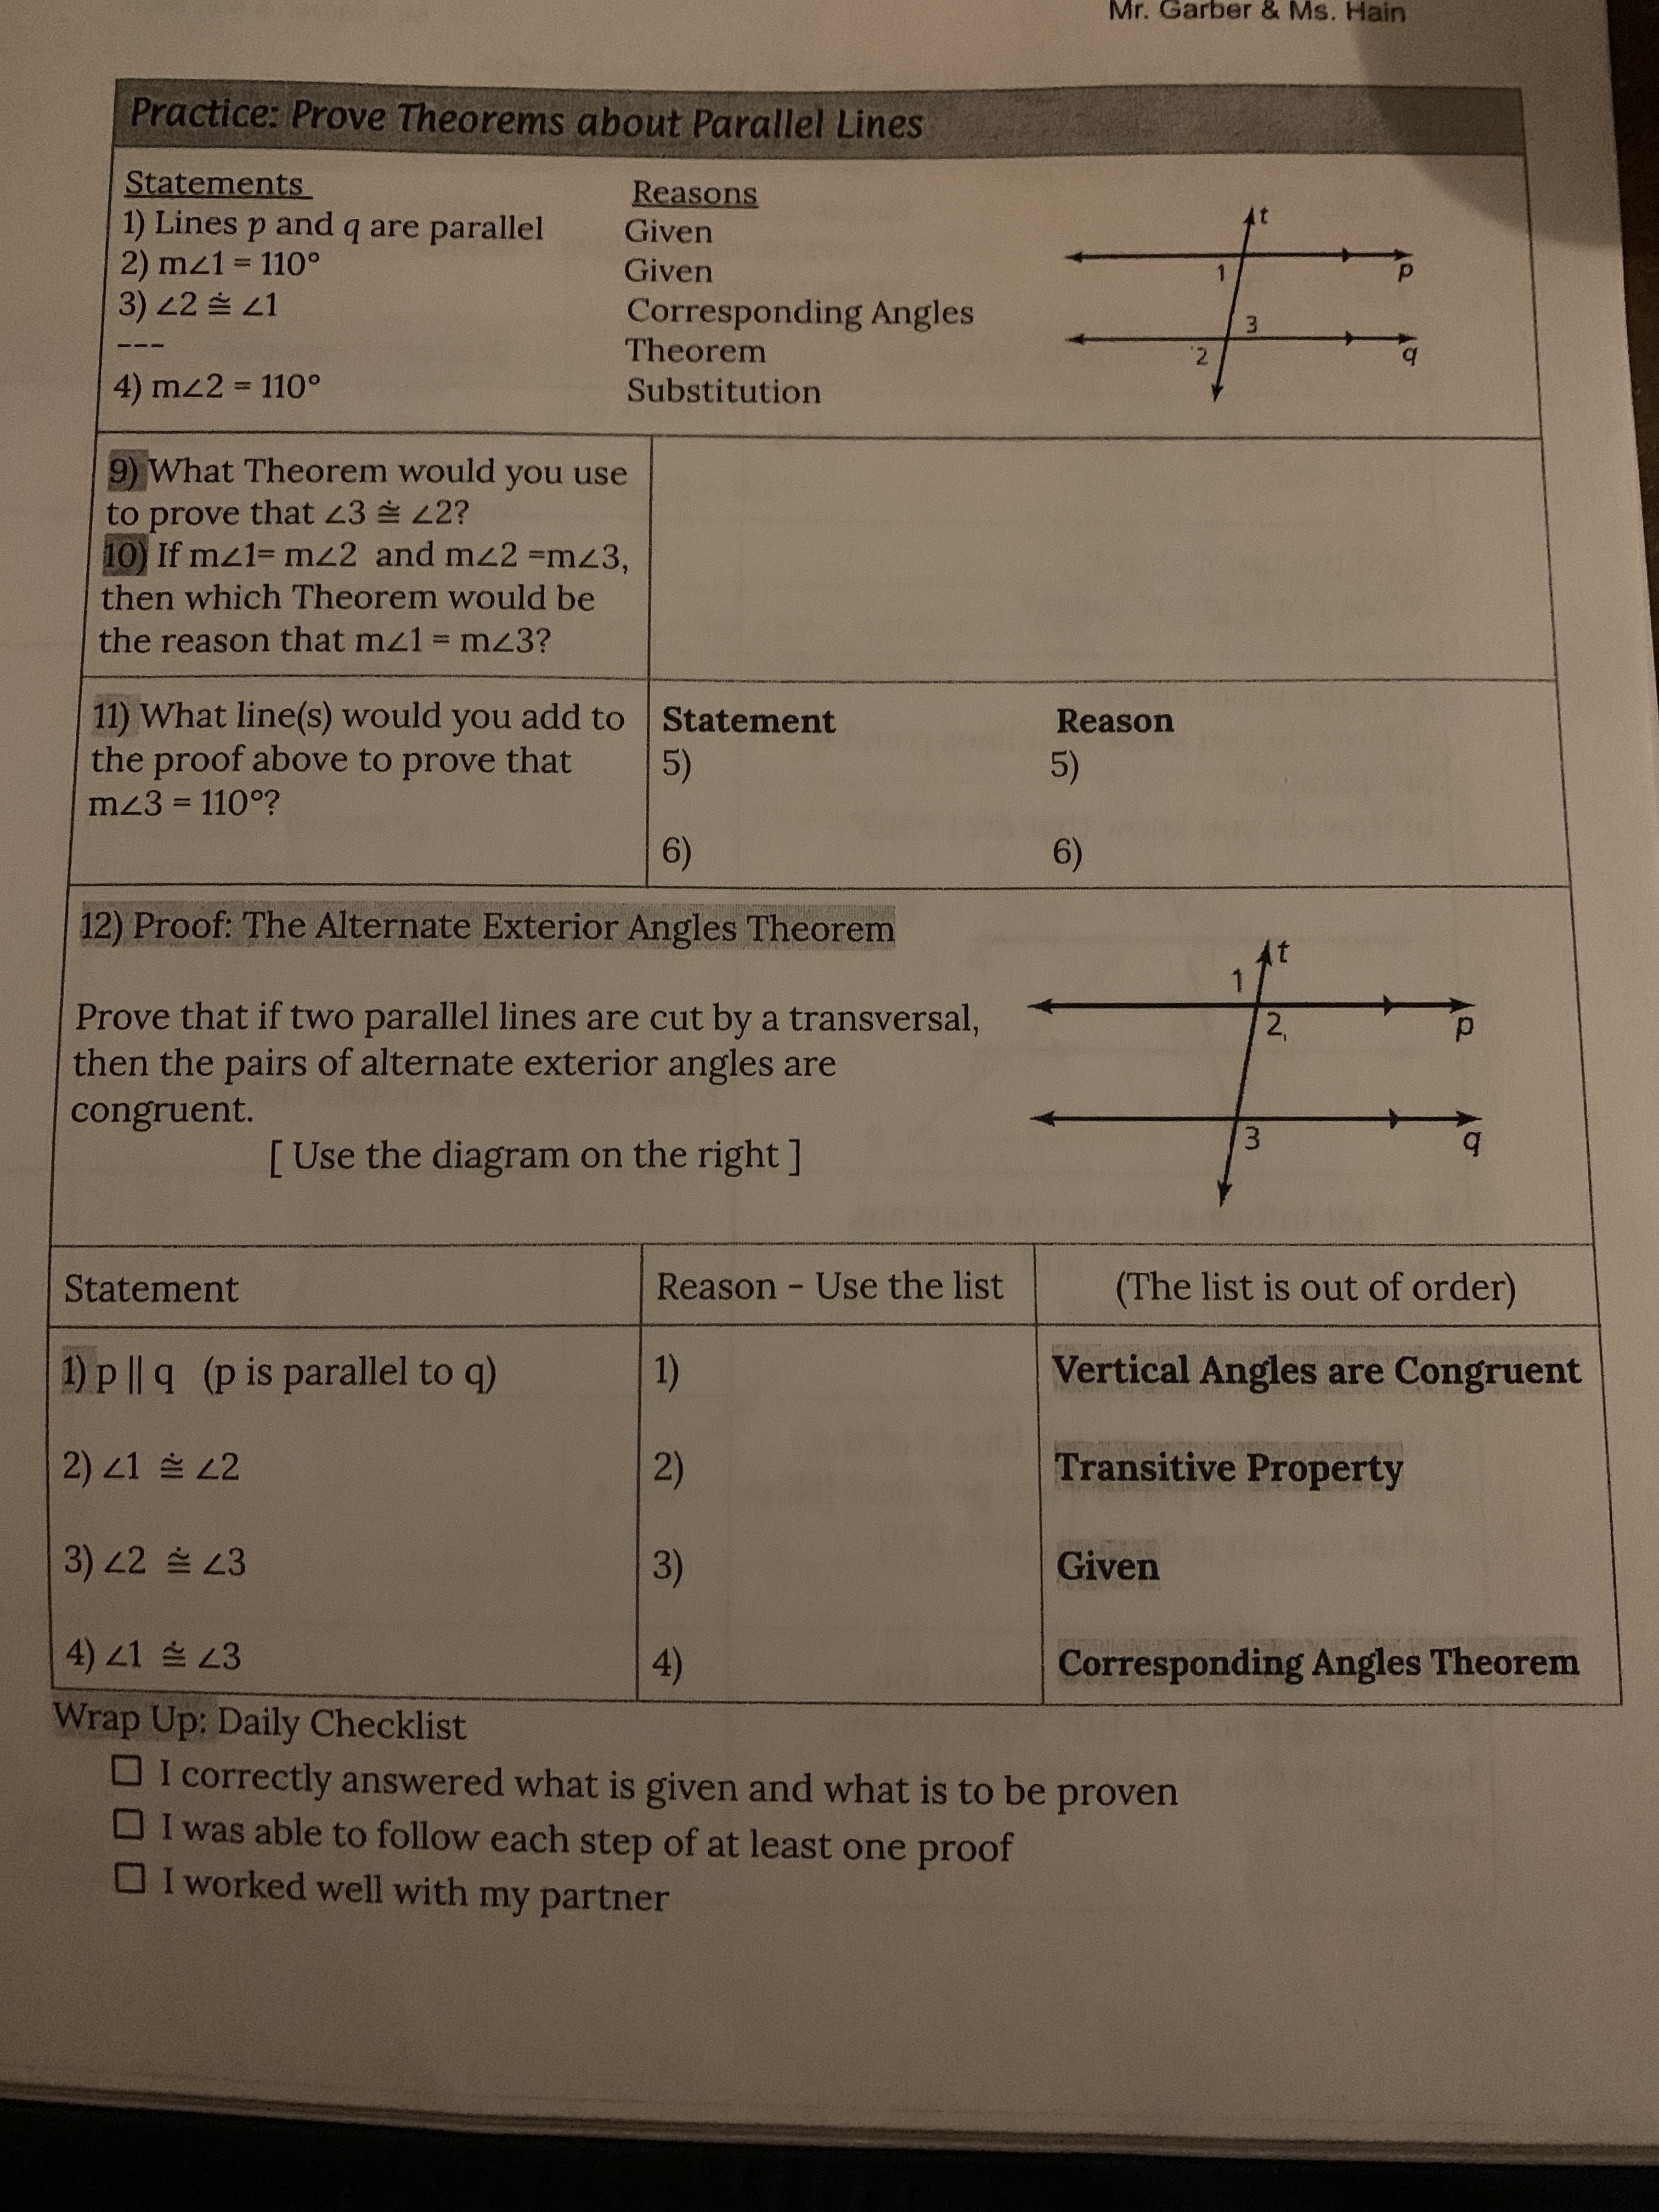 3.
Mr. Garber & Ms. Hain
Practice: Prove Theorems about Parallel Lines
Statements
1) Lines p and q are parallel
2) mz1 110°
3) 22 슬 21
Reasons
Given
Given
Corresponding Angles
Theorem
- --
4) mz2 = 110°
Substitution
9) What Theorem would you use
to prove that 23 42?
10) If mz1= mz2 and mz2 =mz3,
then which Theorem would be
the reason that mz1 = mz3?
11) What line(s) would you add to Statement
the proof above to prove that
Reason
5)
5)
mz3 = 110°?
%3D
6)
6)
12) Proof: The Alternate Exterior Angles Theorem
At
Prove that if two parallel lines are cut by a transversal,
then the pairs of alternate exterior angles are
2,
d.
congruent.
[Use the diagram on the right ]
b.
Statement
Reason Use the list
(The list is out of order)
1) p || q (p is parallel to q)
Vertical Angles are Congruent
1)
2) 1 2
Transitive Property
2)
3)22 3
Given
3)
4) 21 스 23
Corresponding Angles Theorem
()
Wrap Up; Daily Checklist
DI correctly answered what is given and what is to be proven
OI was able to follow each step of at least one proof
OI worked well with my partner
